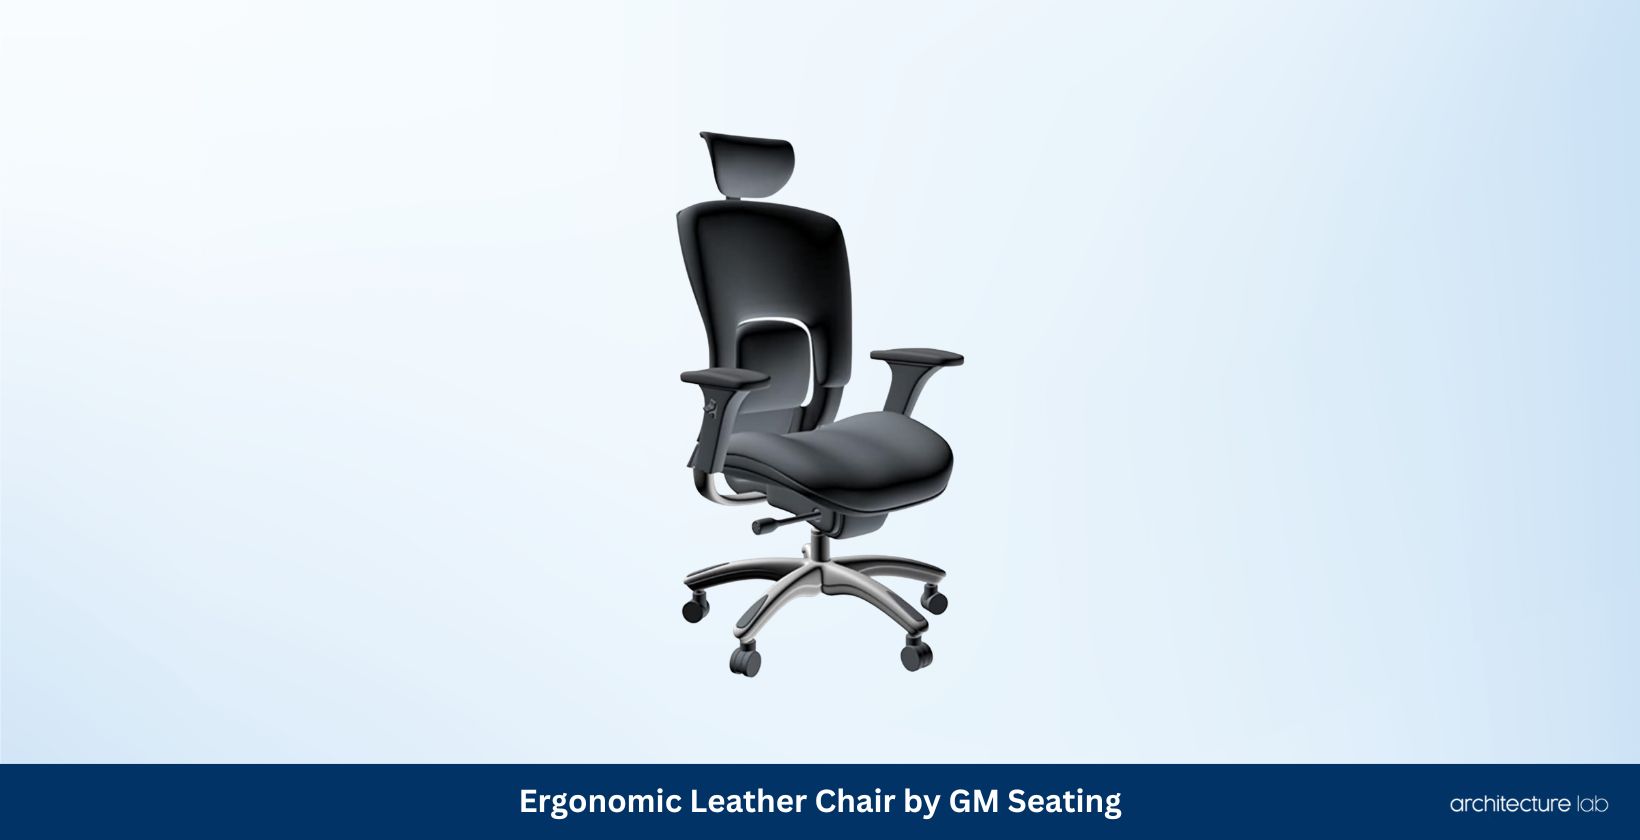 Ergonomic leather chair by gm seating